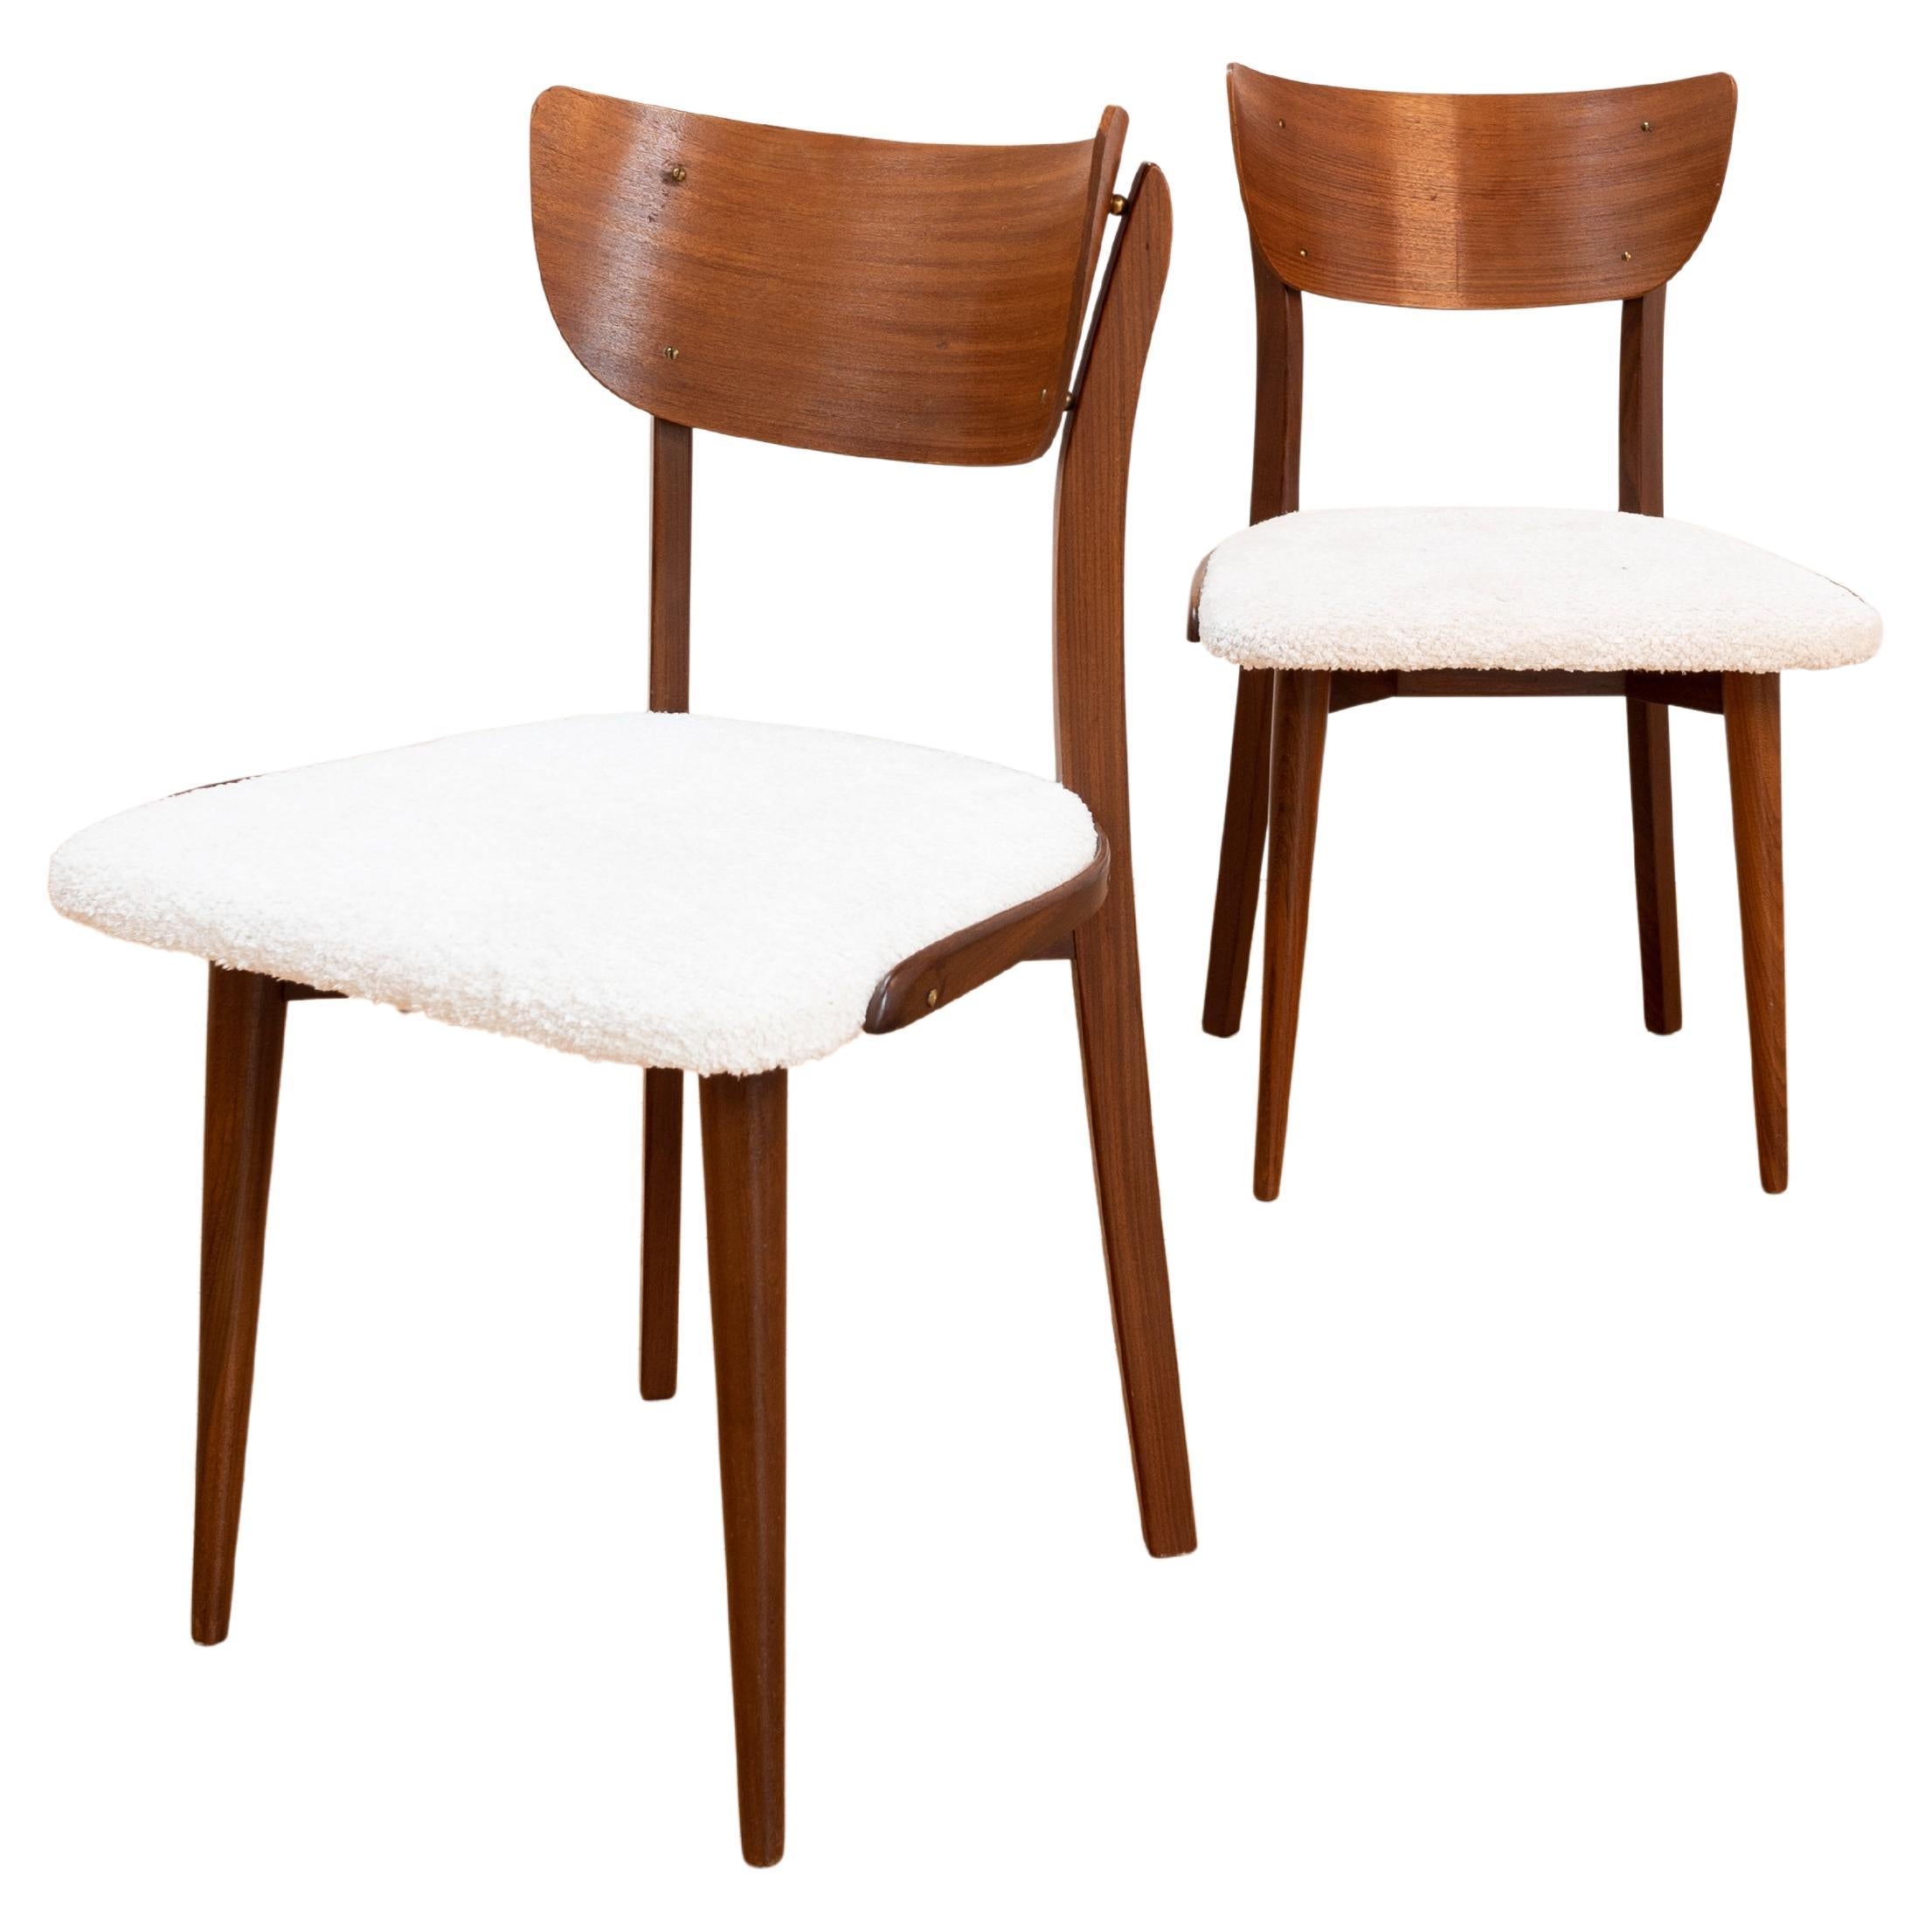 Set of 2 chairs, Danish design, with new upholstery For Sale